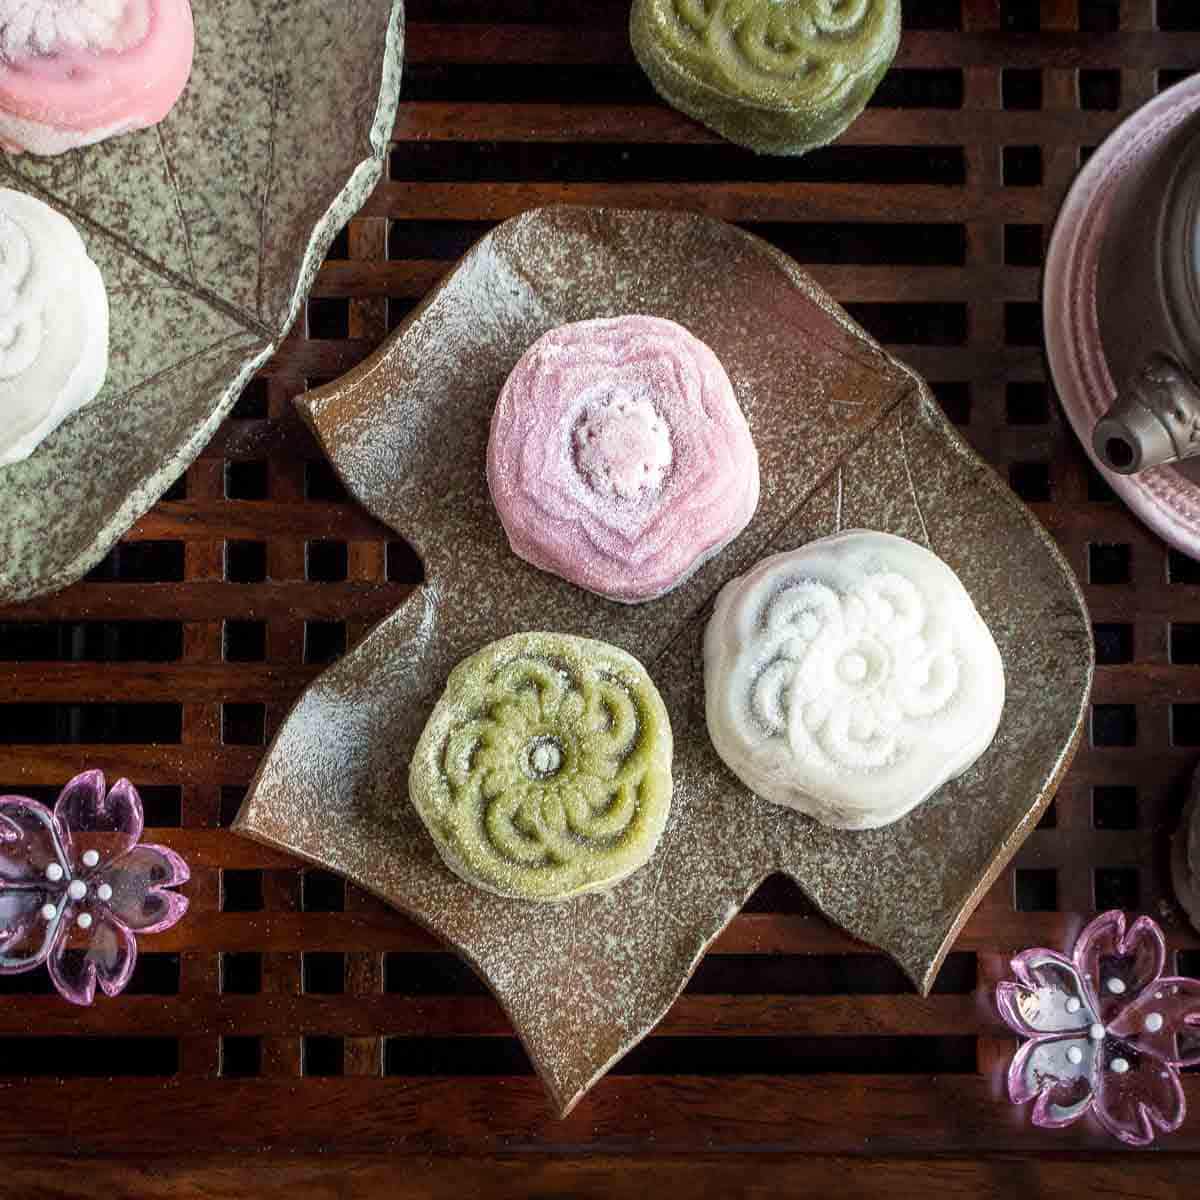 3 Snow skin mooncakes on a leaf plate colored with green matcha and pink strawberry.